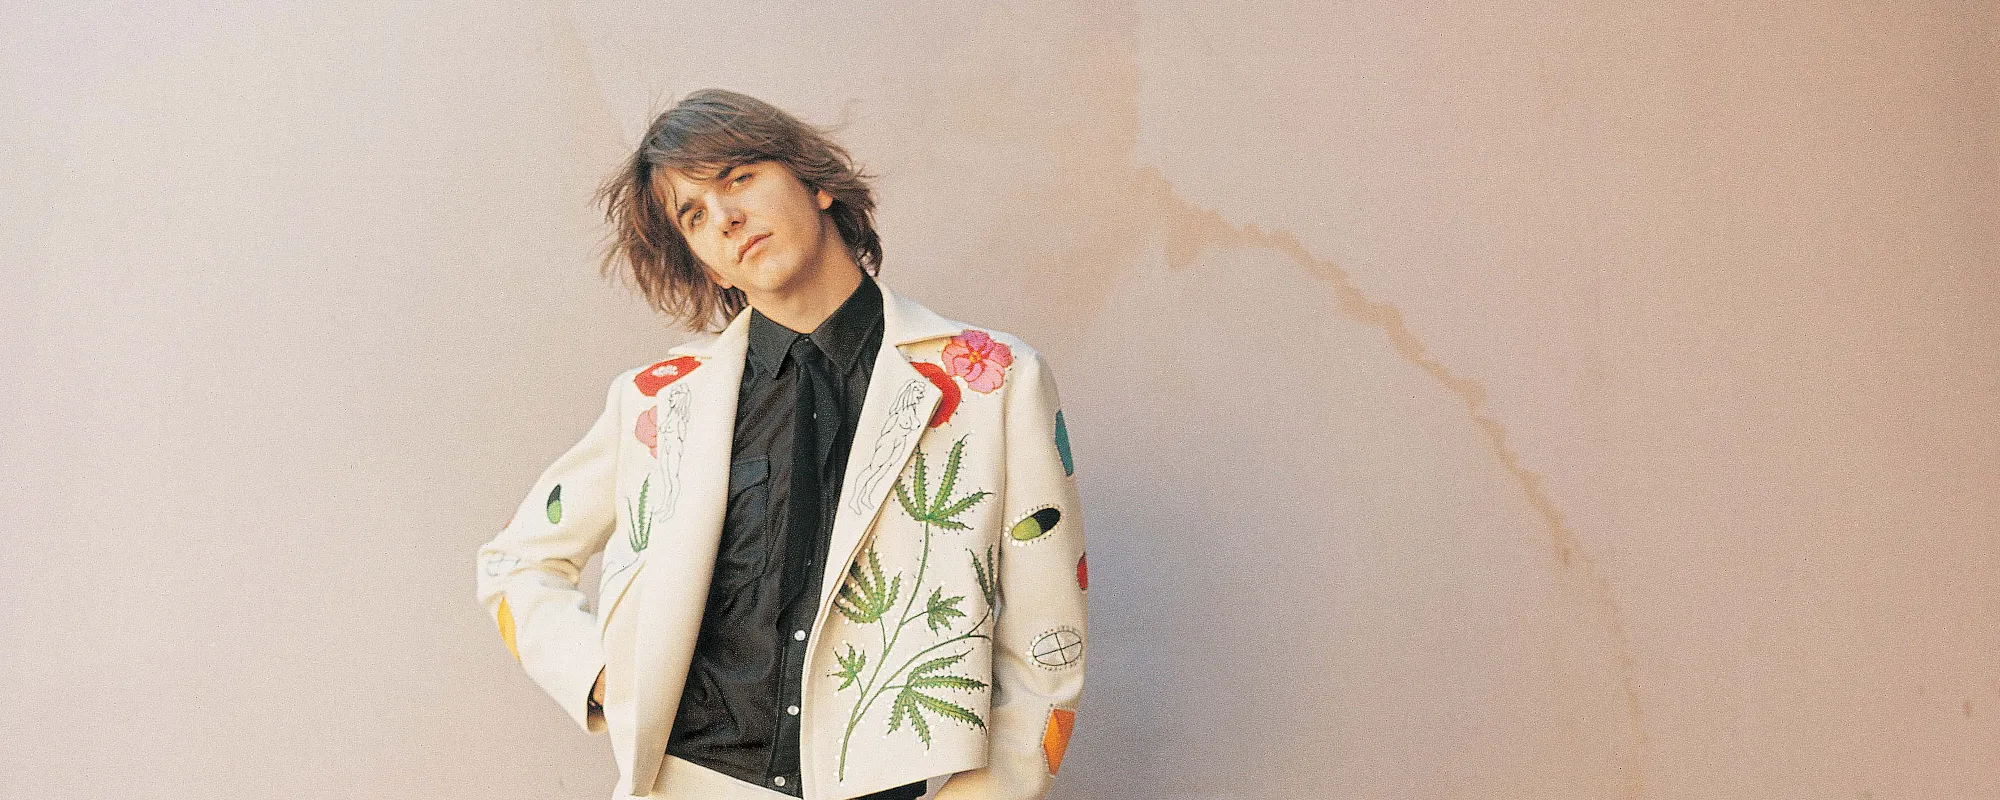 Behind the Mystifying Death of Gram Parsons